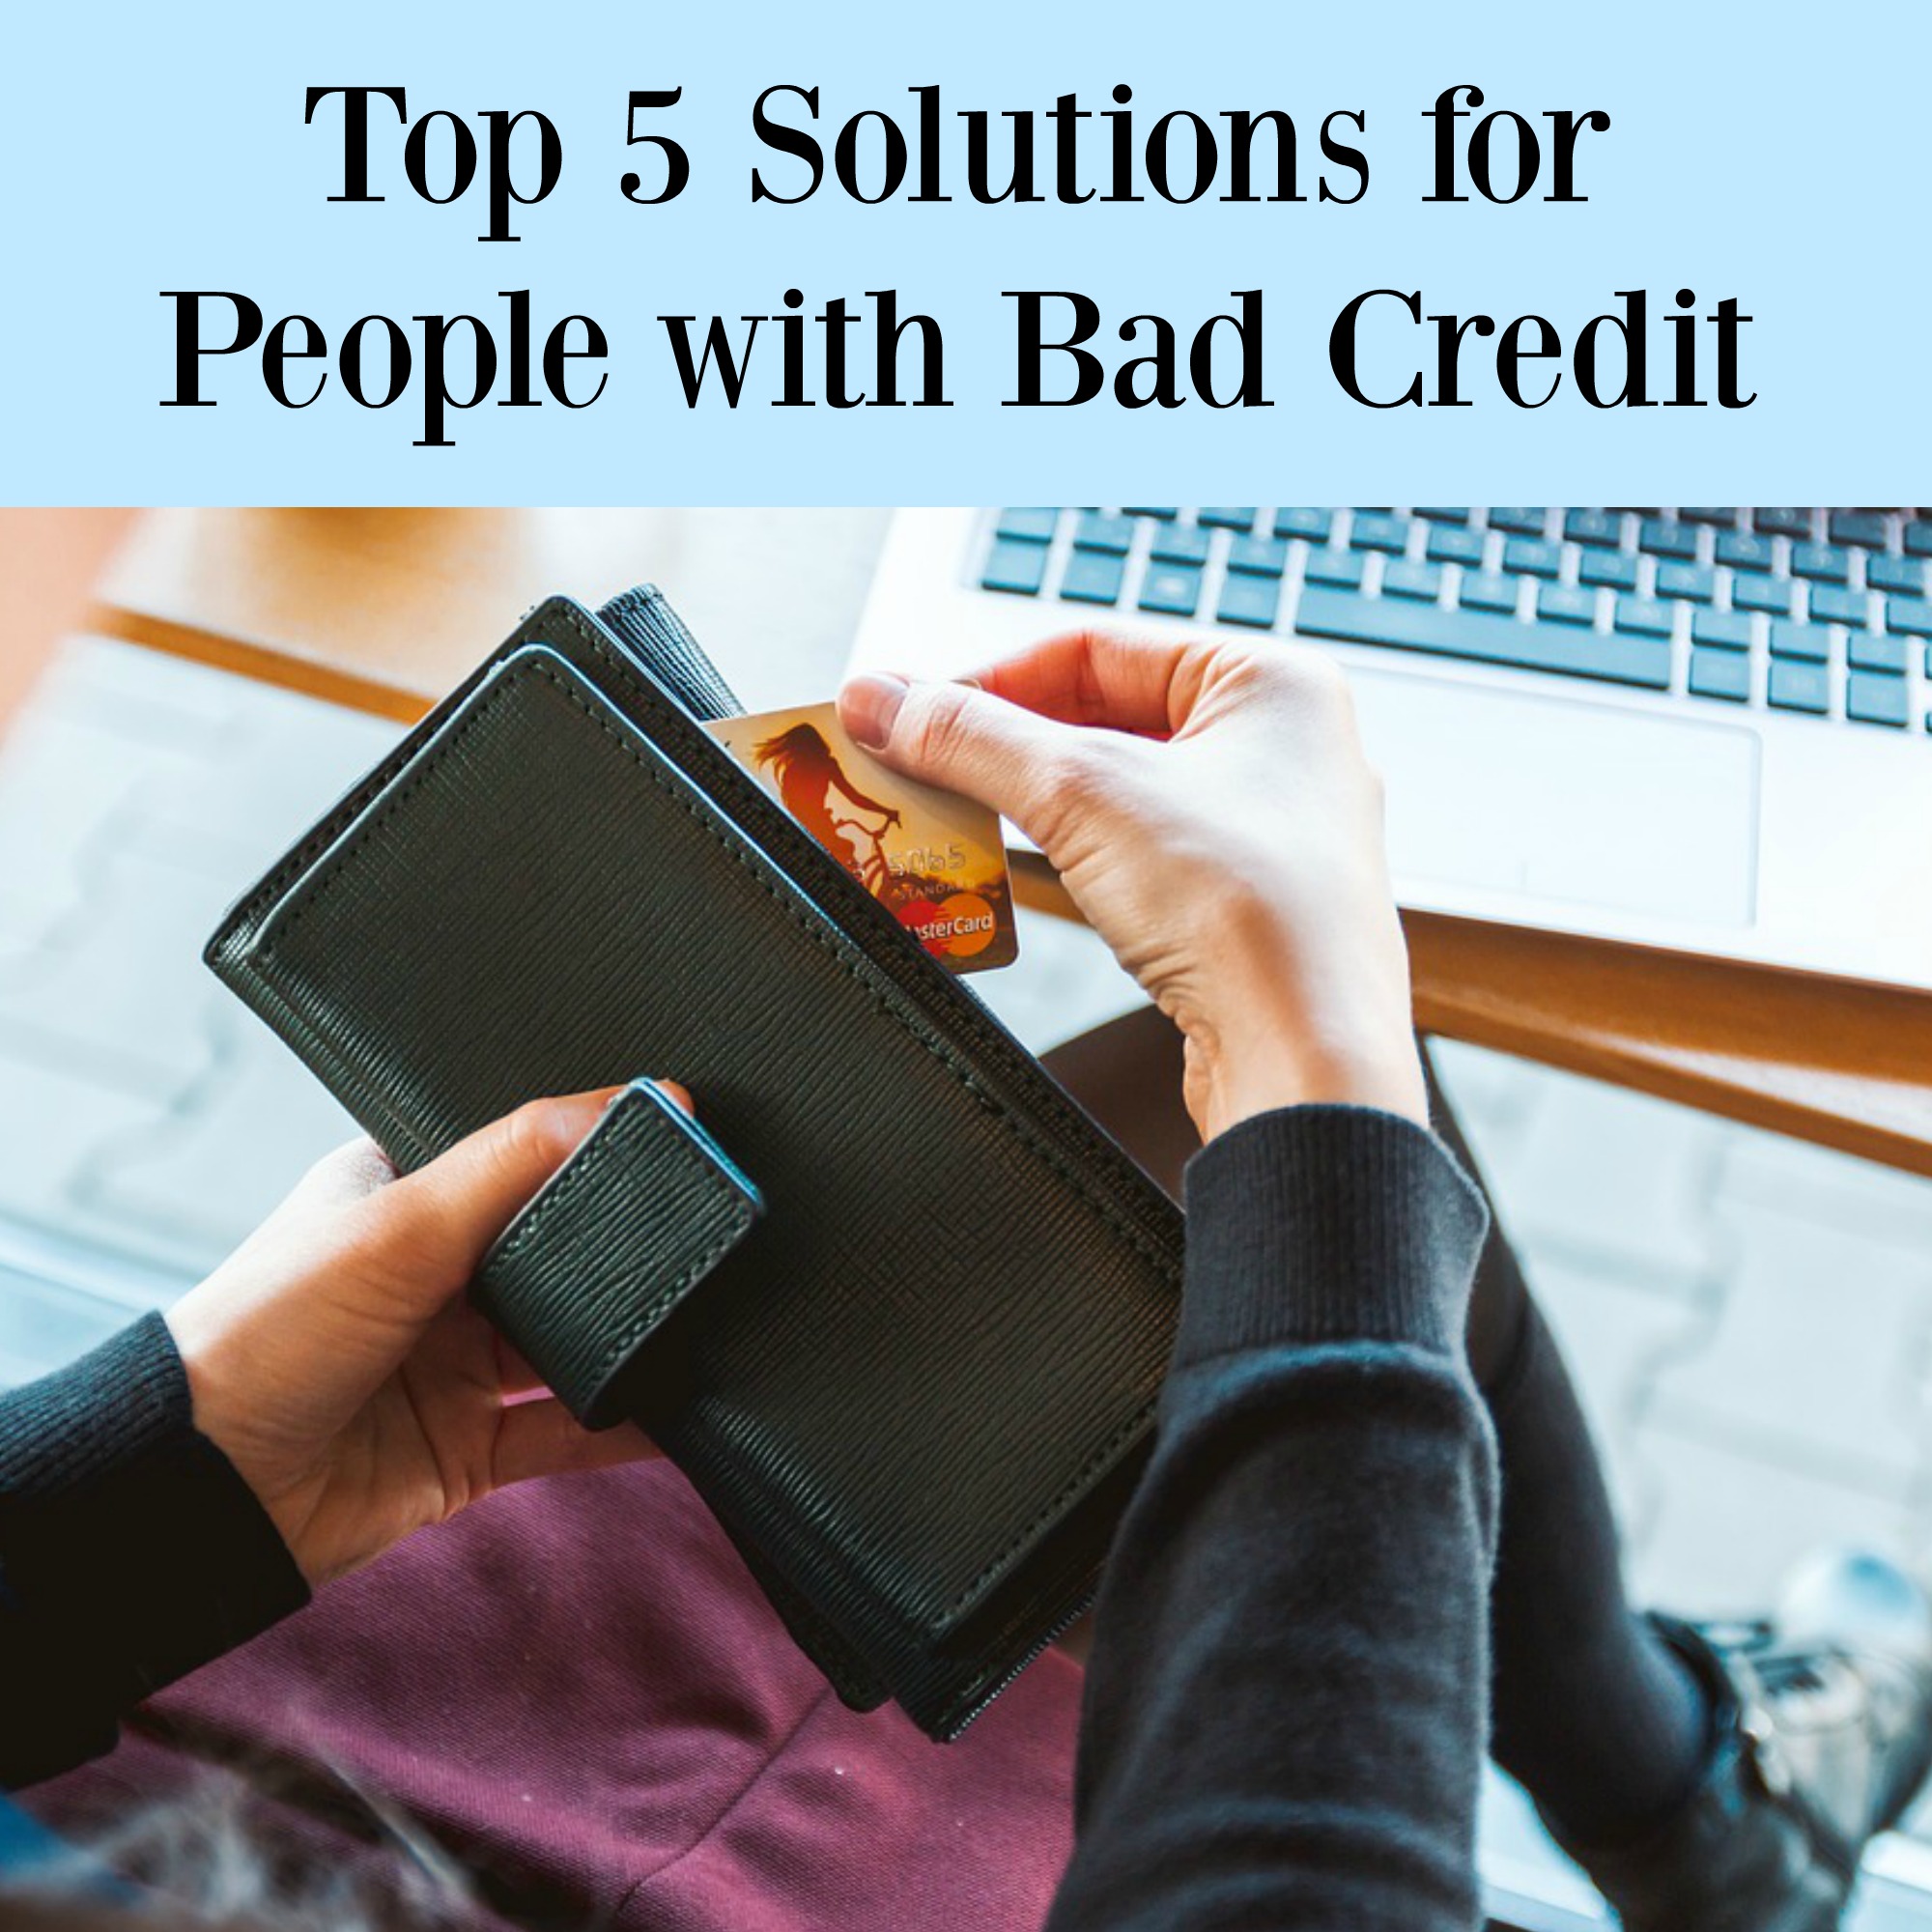 Top 5 Solutions for People with Bad Credit